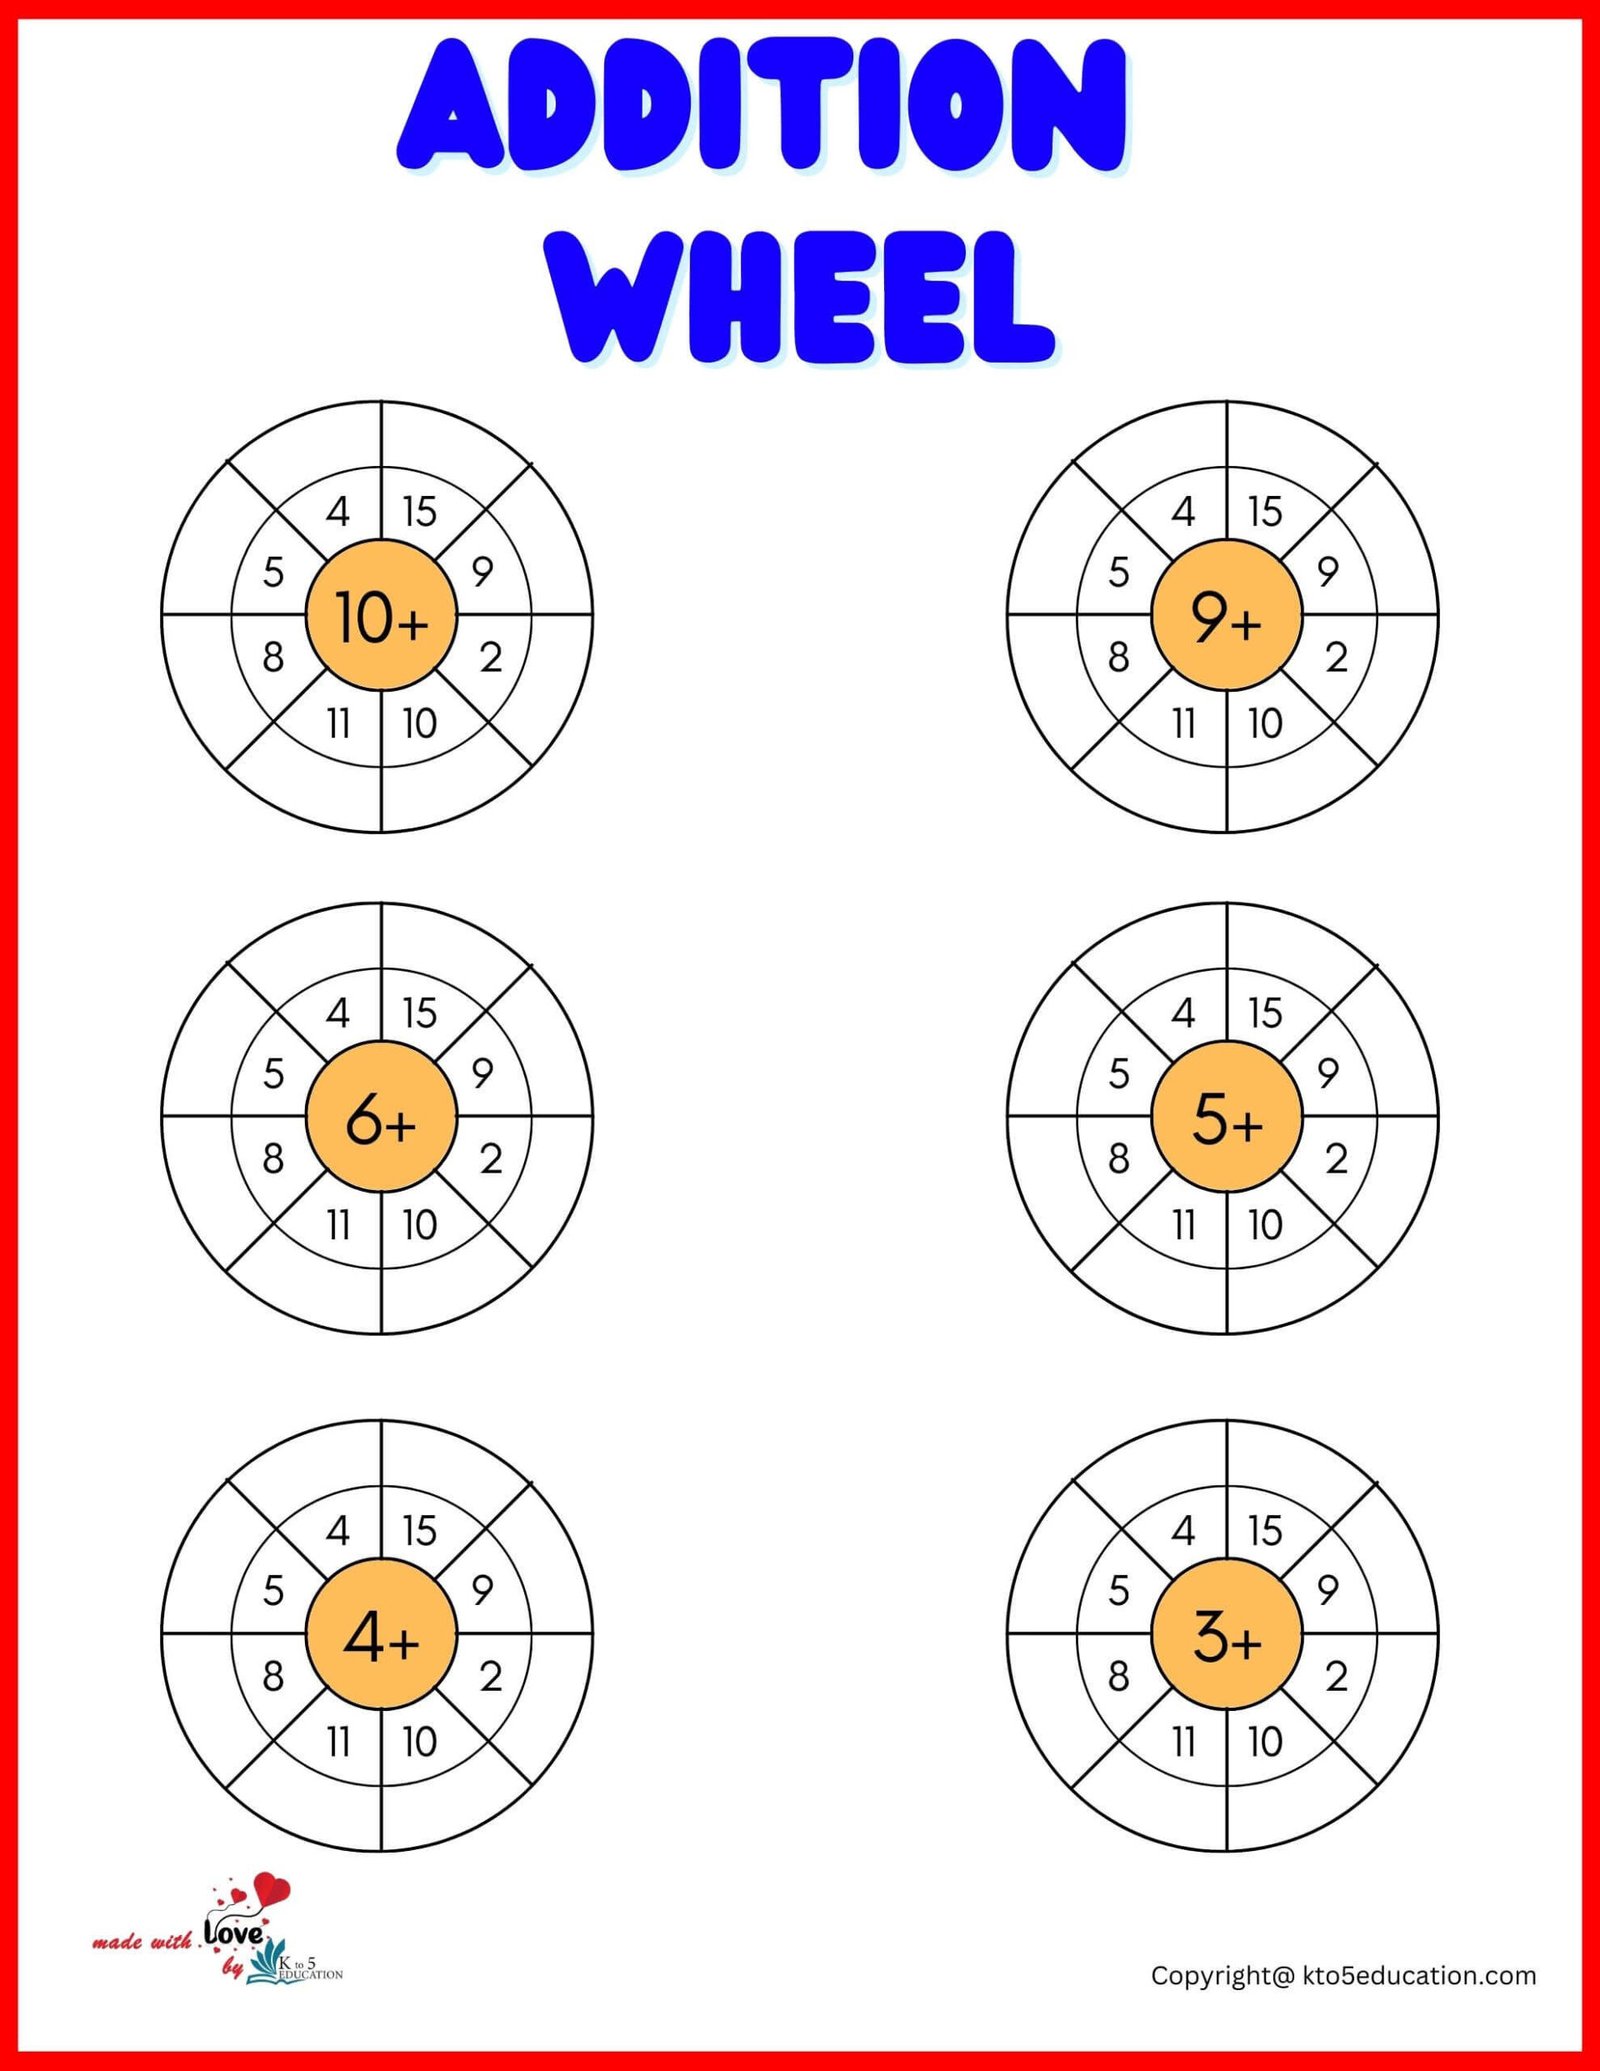 free-addition-wheel-for-online-practice-worksheet-free